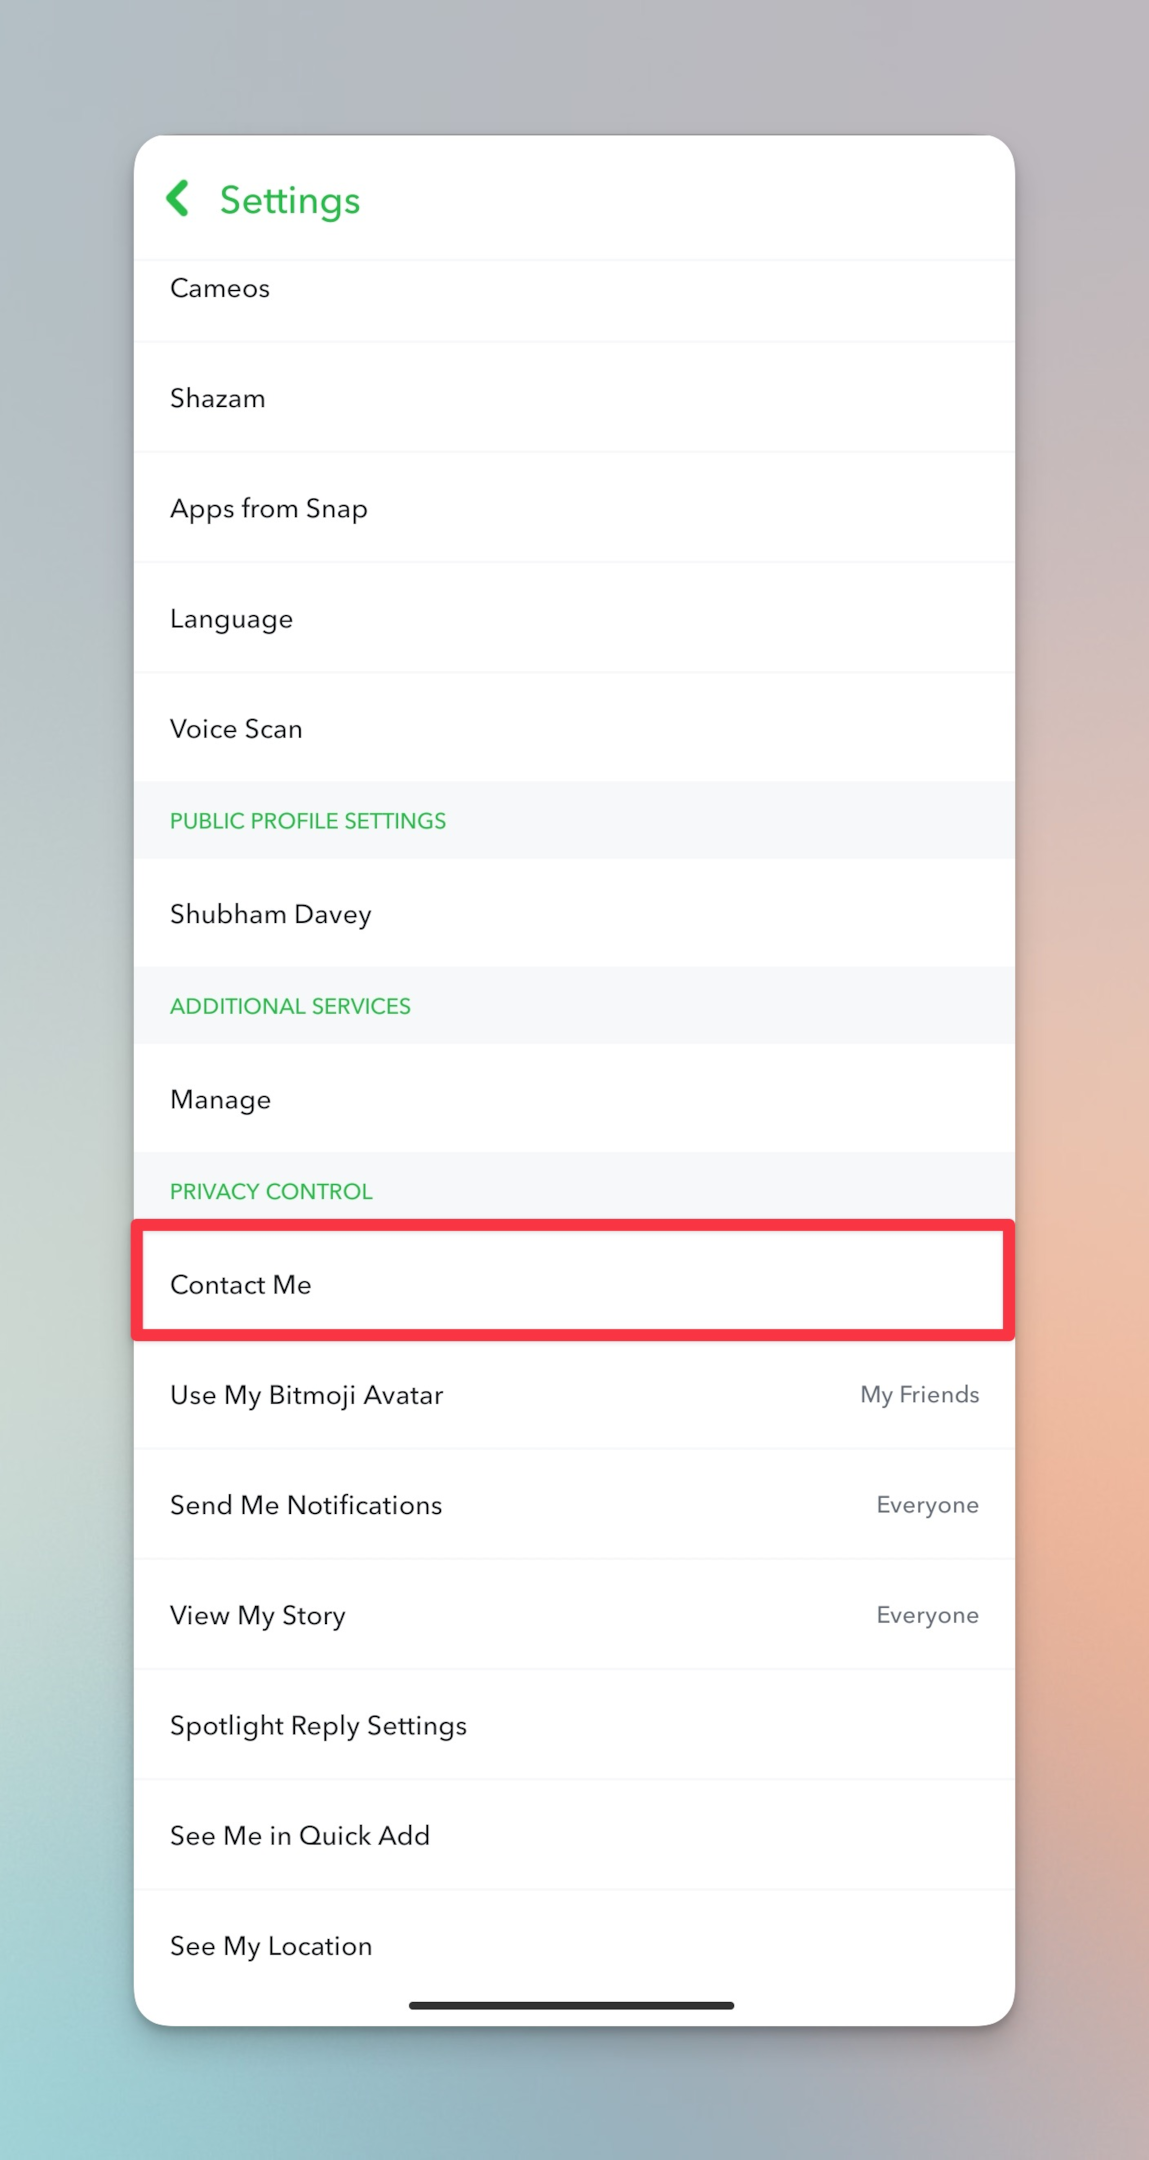 Remote.tools highlighting the "Contact Me" setting to help with your profile views on Snapchat